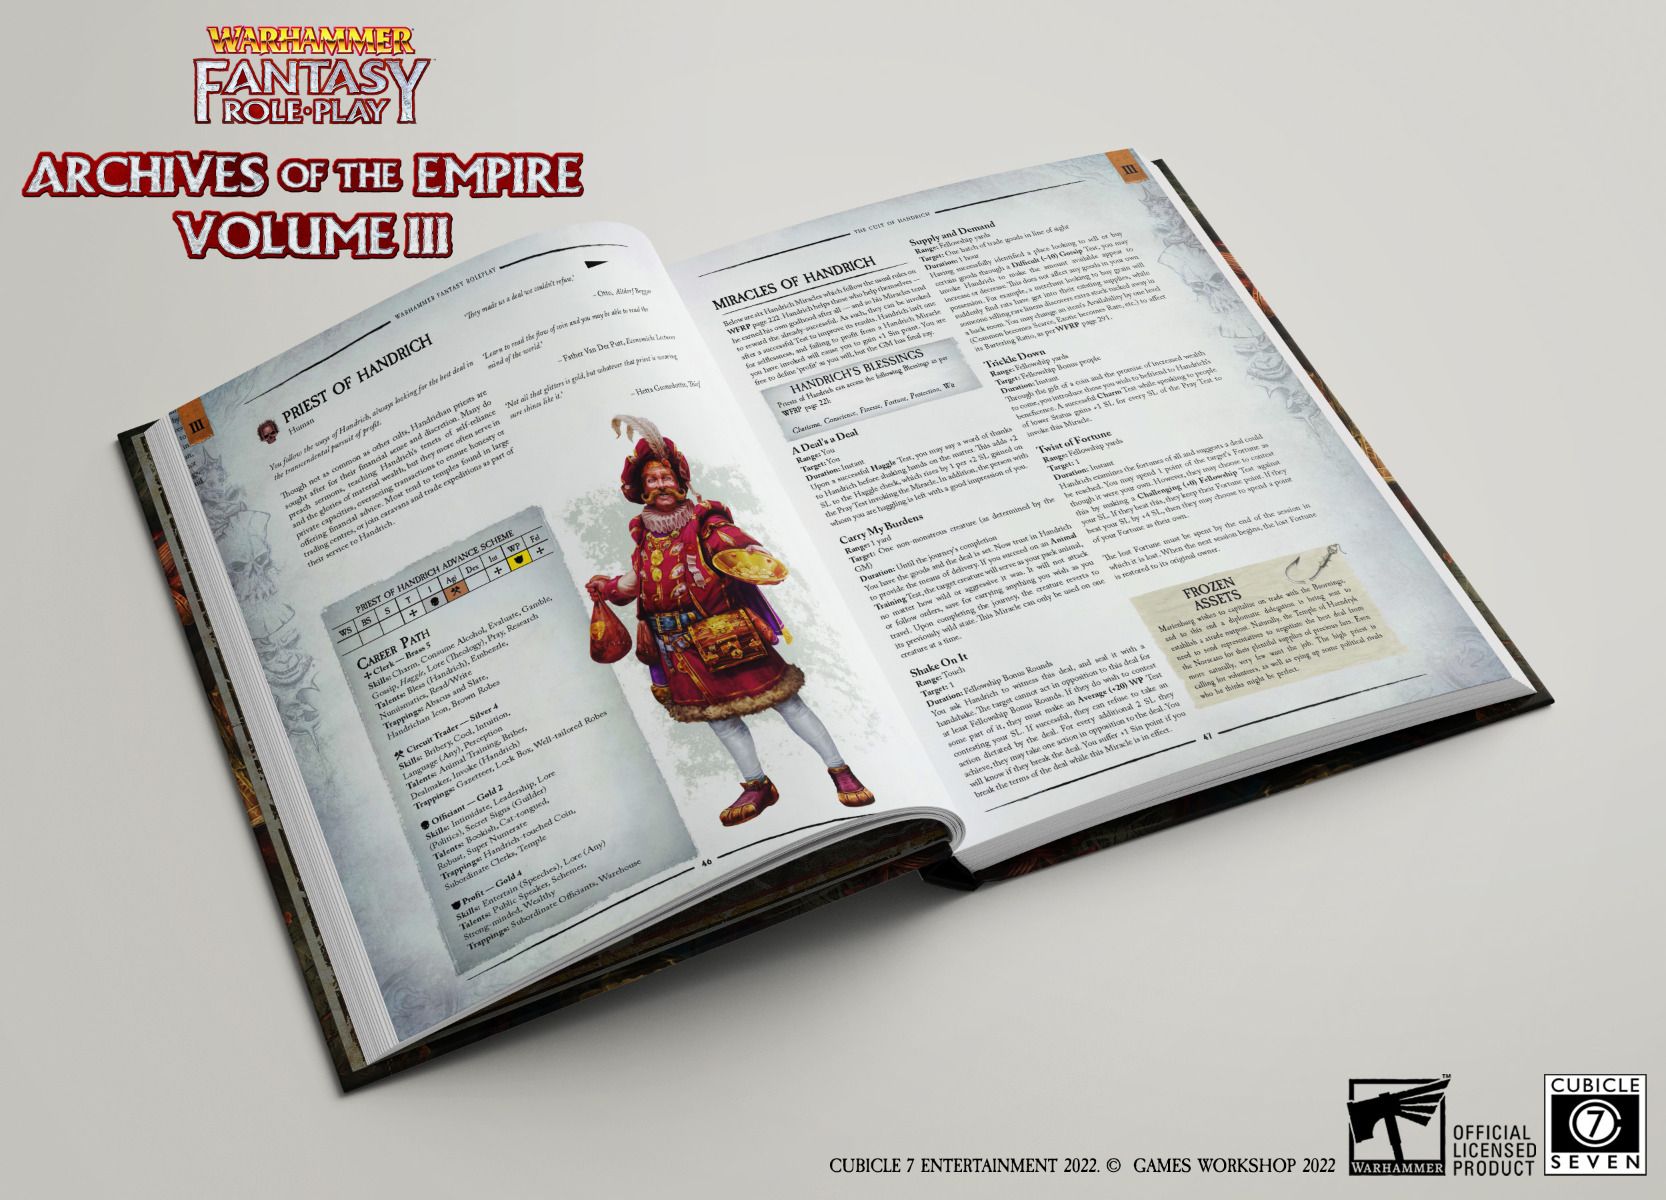 Archies Of The Empire Volume III Interior #2 - Warhammer Fantasy Role-Play